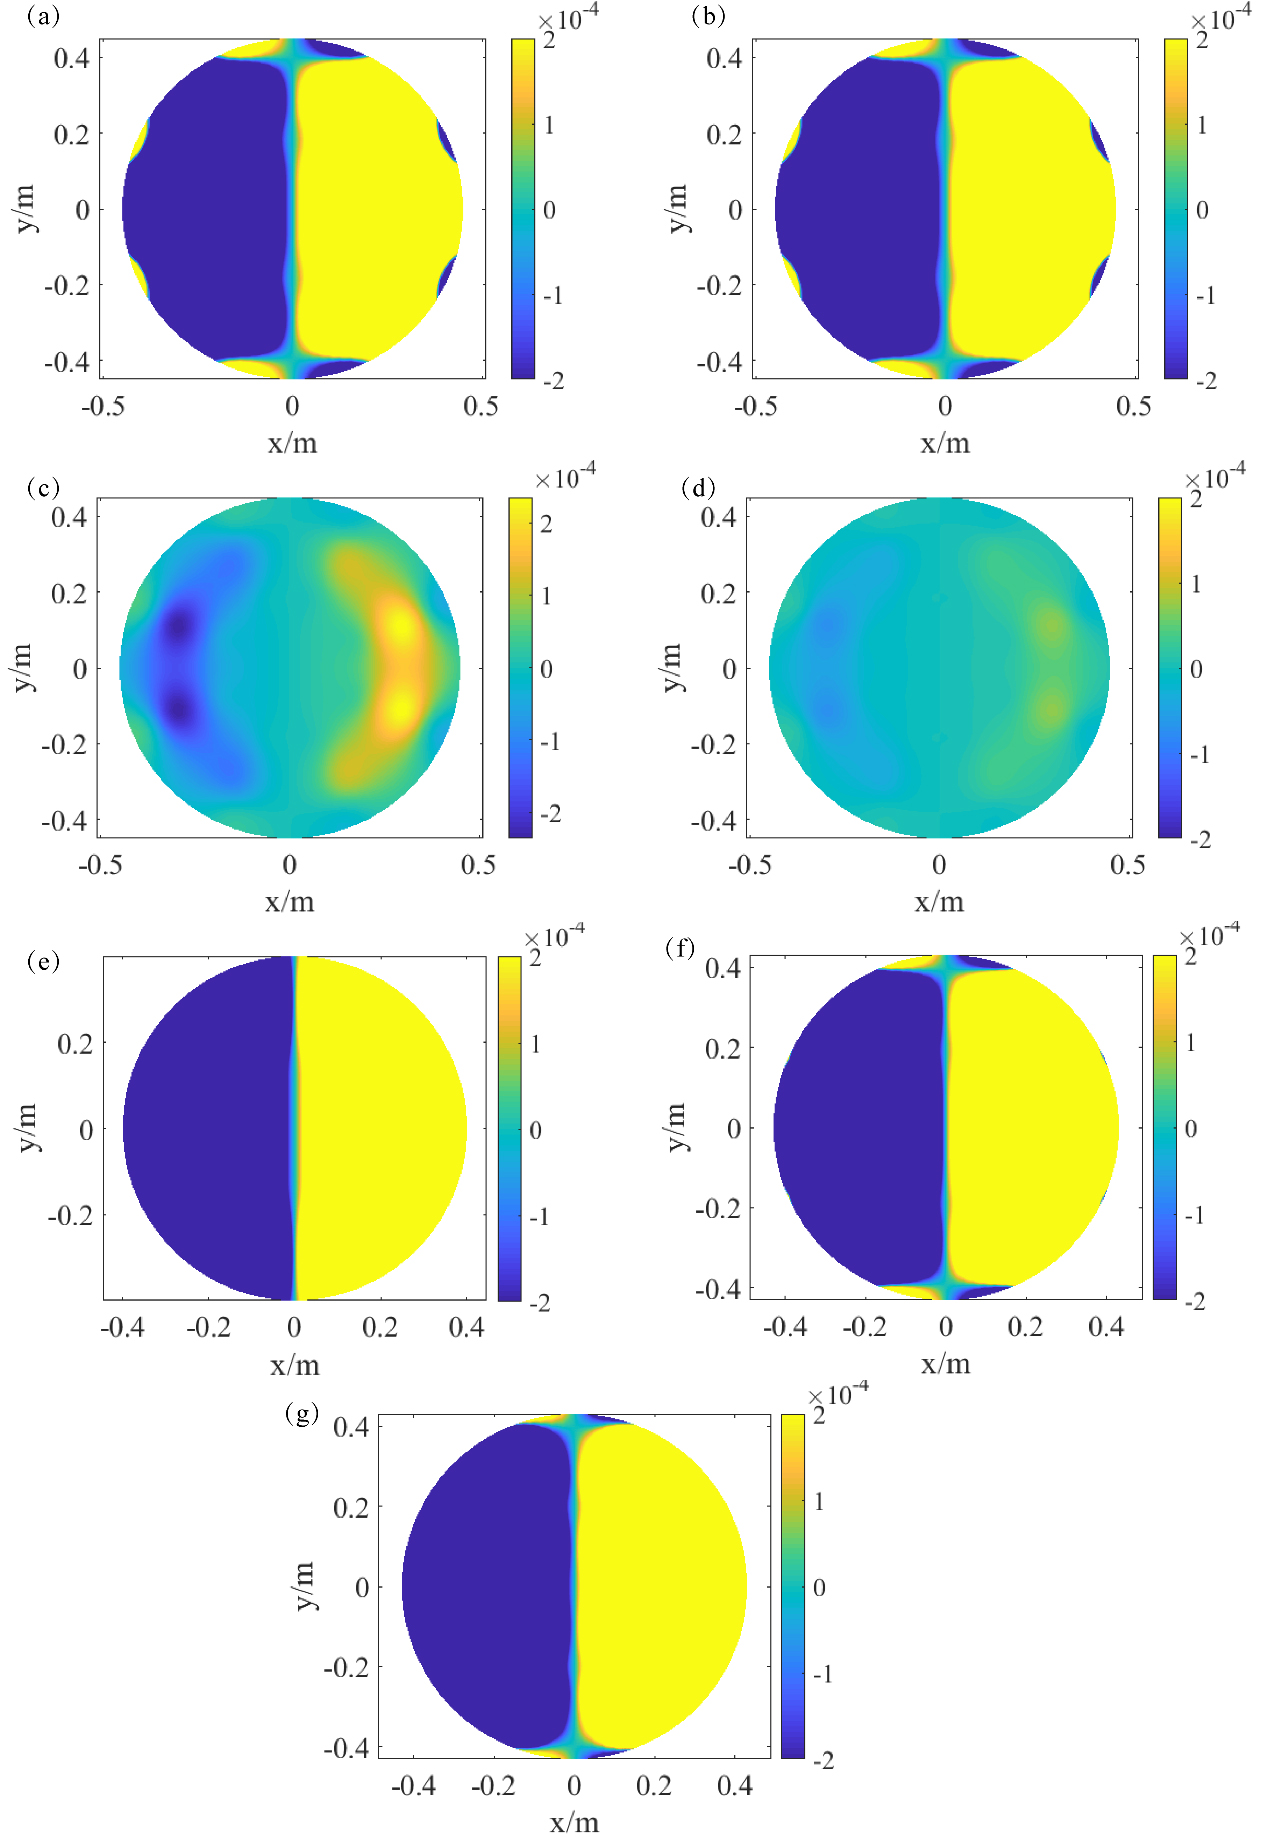 A comparison of the magnetic field : (a) and (b) are the magnetic field for proposed coils (μr= 400,1616) without considering pole piece effect, respectively; (c) and (d) are the magnetic field for proposed coils (μr= 400,1616) considering pole piece effect, respectively; (e) and (f) are the magnetic field for unshielded coils with/without pole piece effect, respectively; (g) is the magnetic field for actively shielded coils.